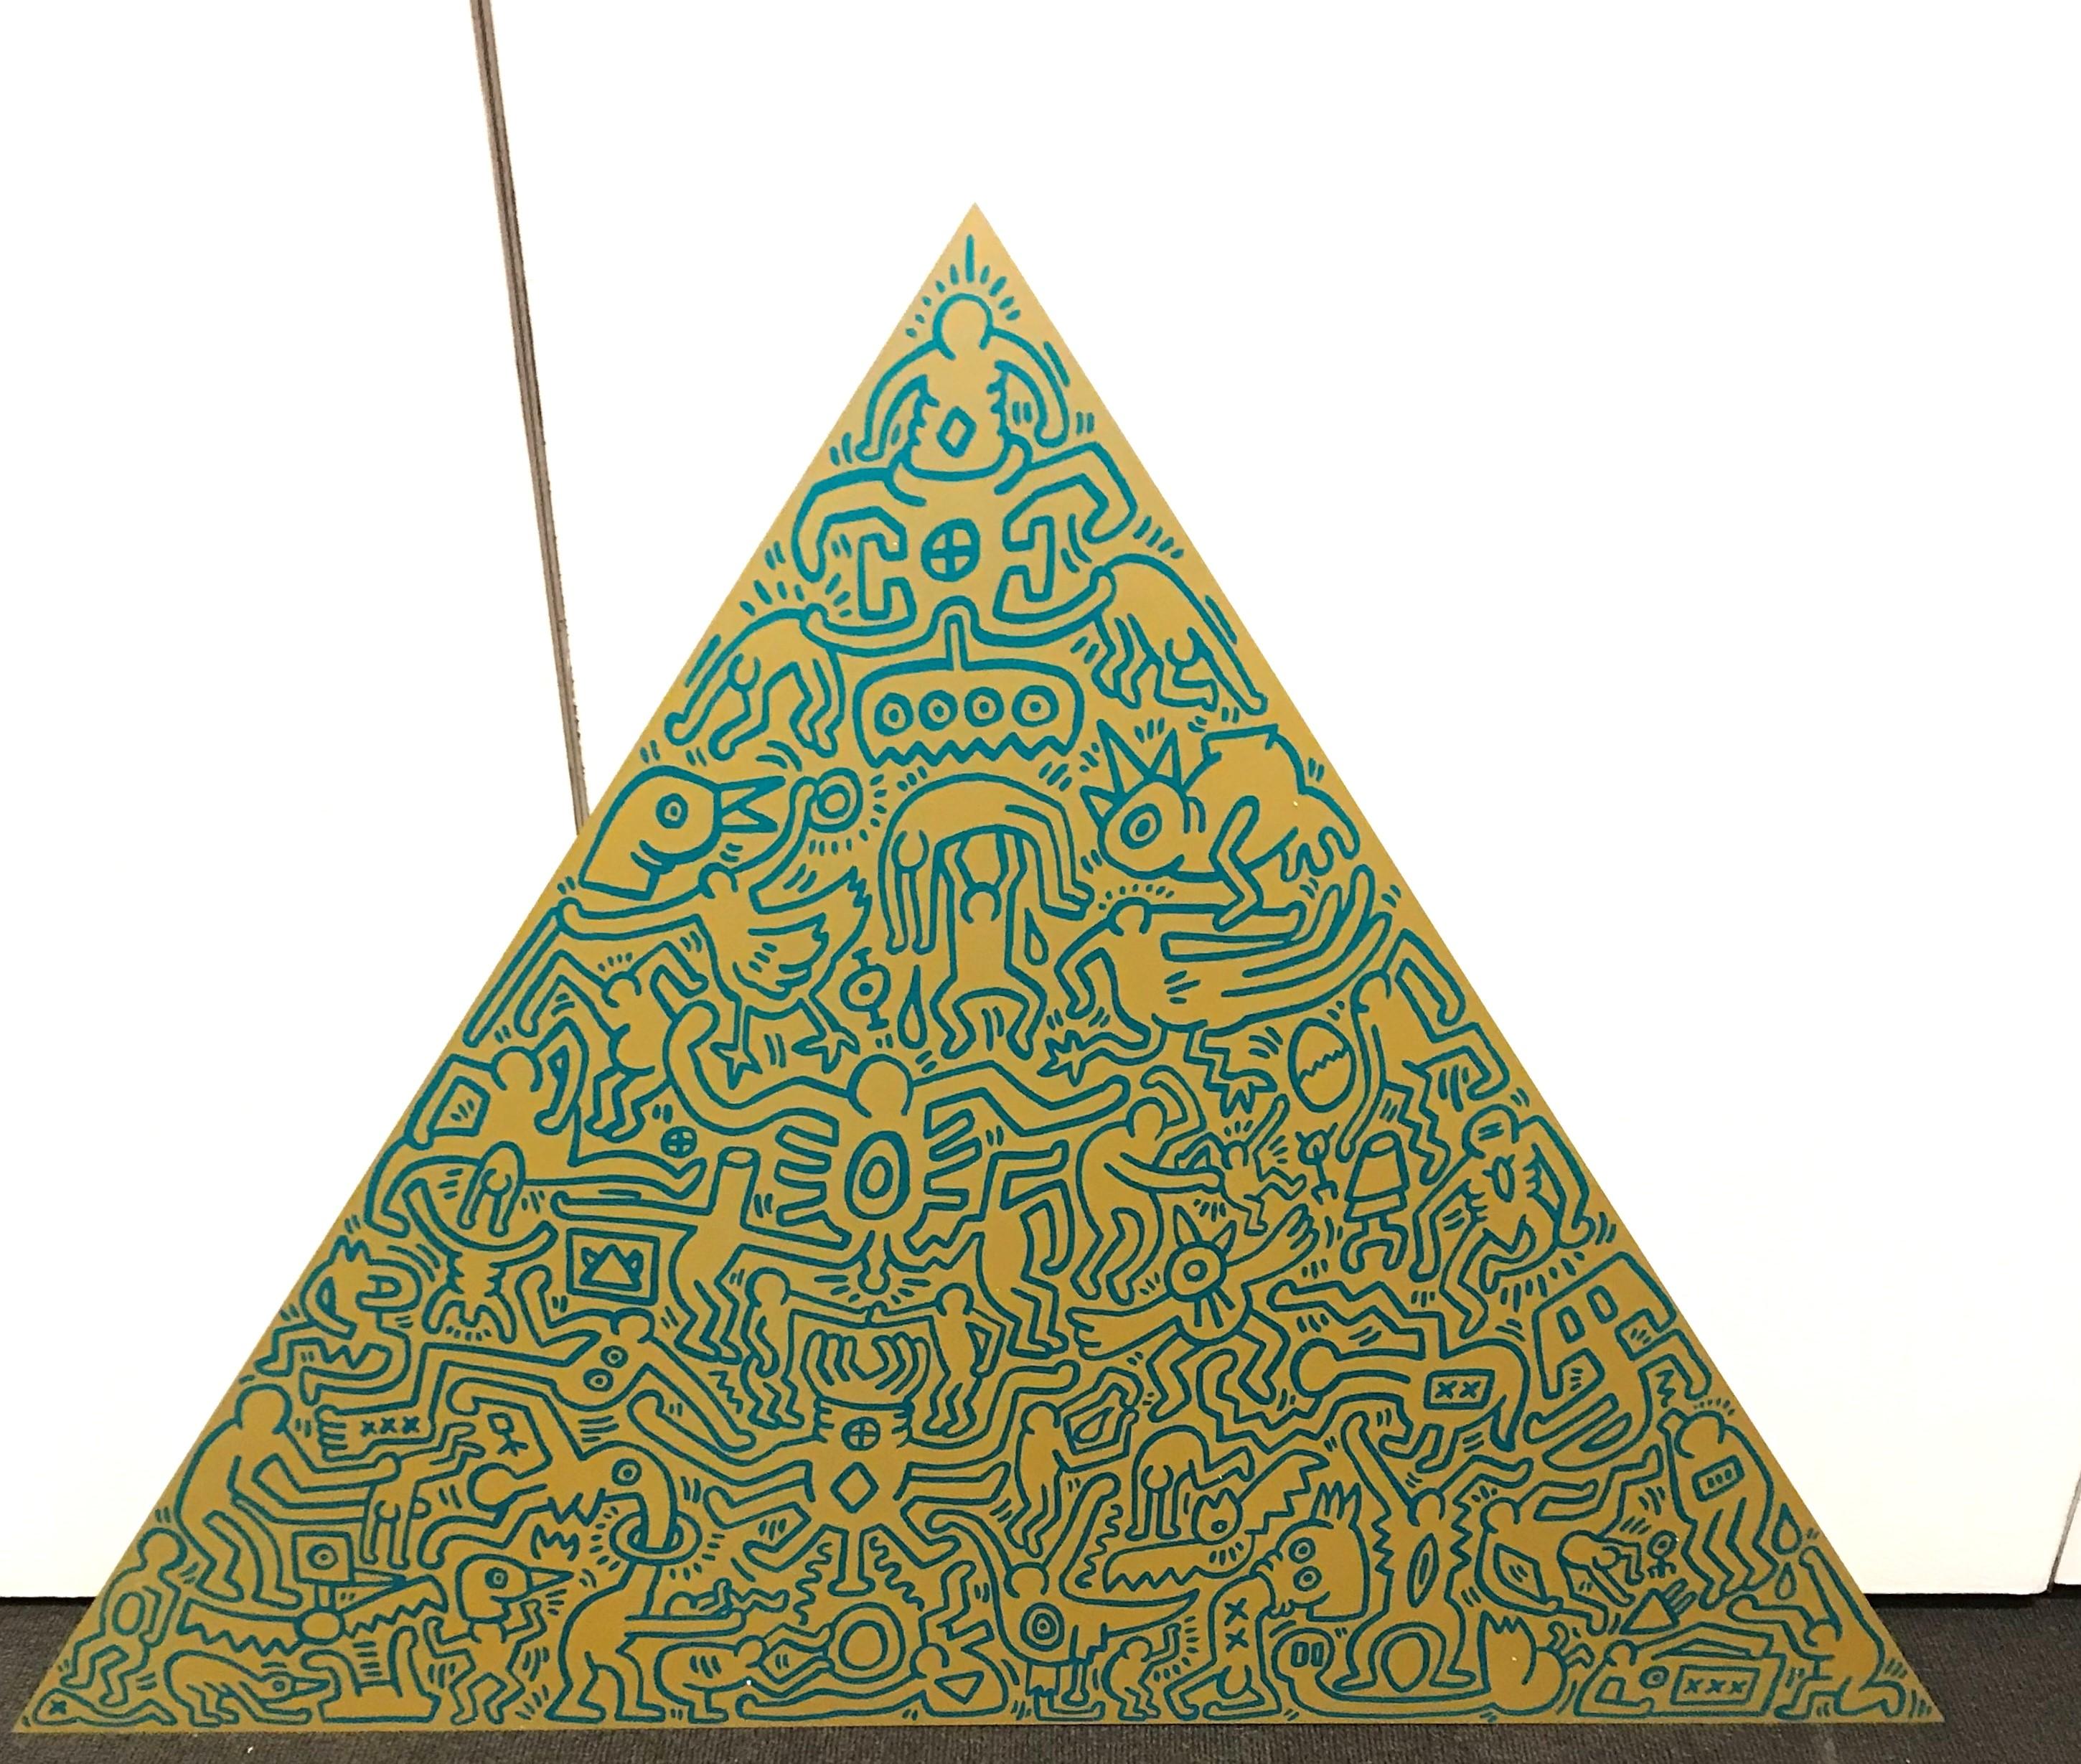 Pyramid - Sculpture by Keith Haring